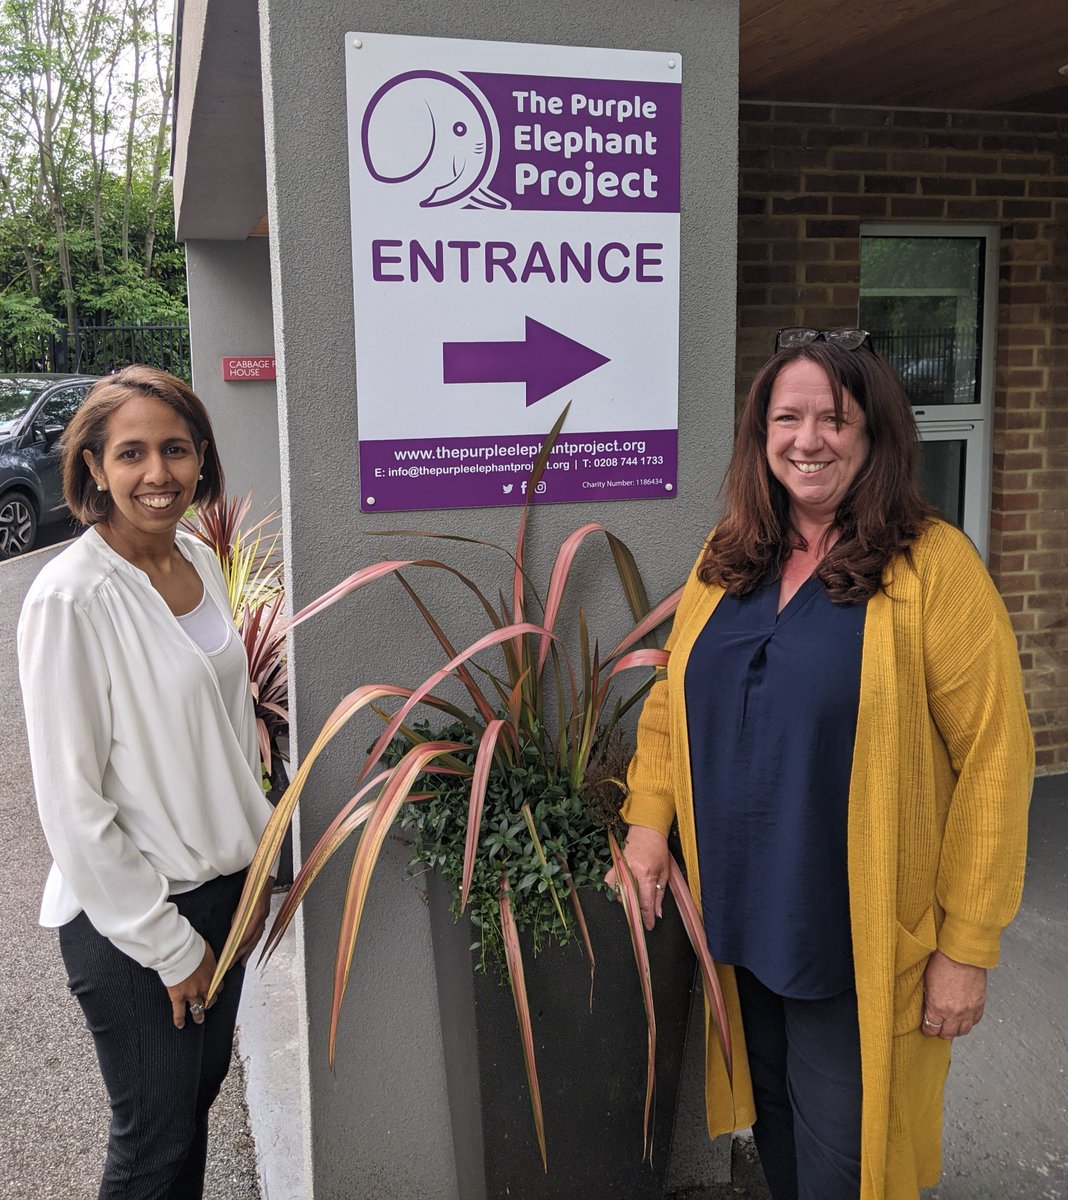 Privilege to meet Jenny Haylock, Founder and CEO of The Purple Elephant Project  @thepurple_ele2 which provides play therapy and art therapy to children and supports families in need. Such huge demand for these services since Covid, I will support Jenny however I can. https://t.co/5n4UiHyRki